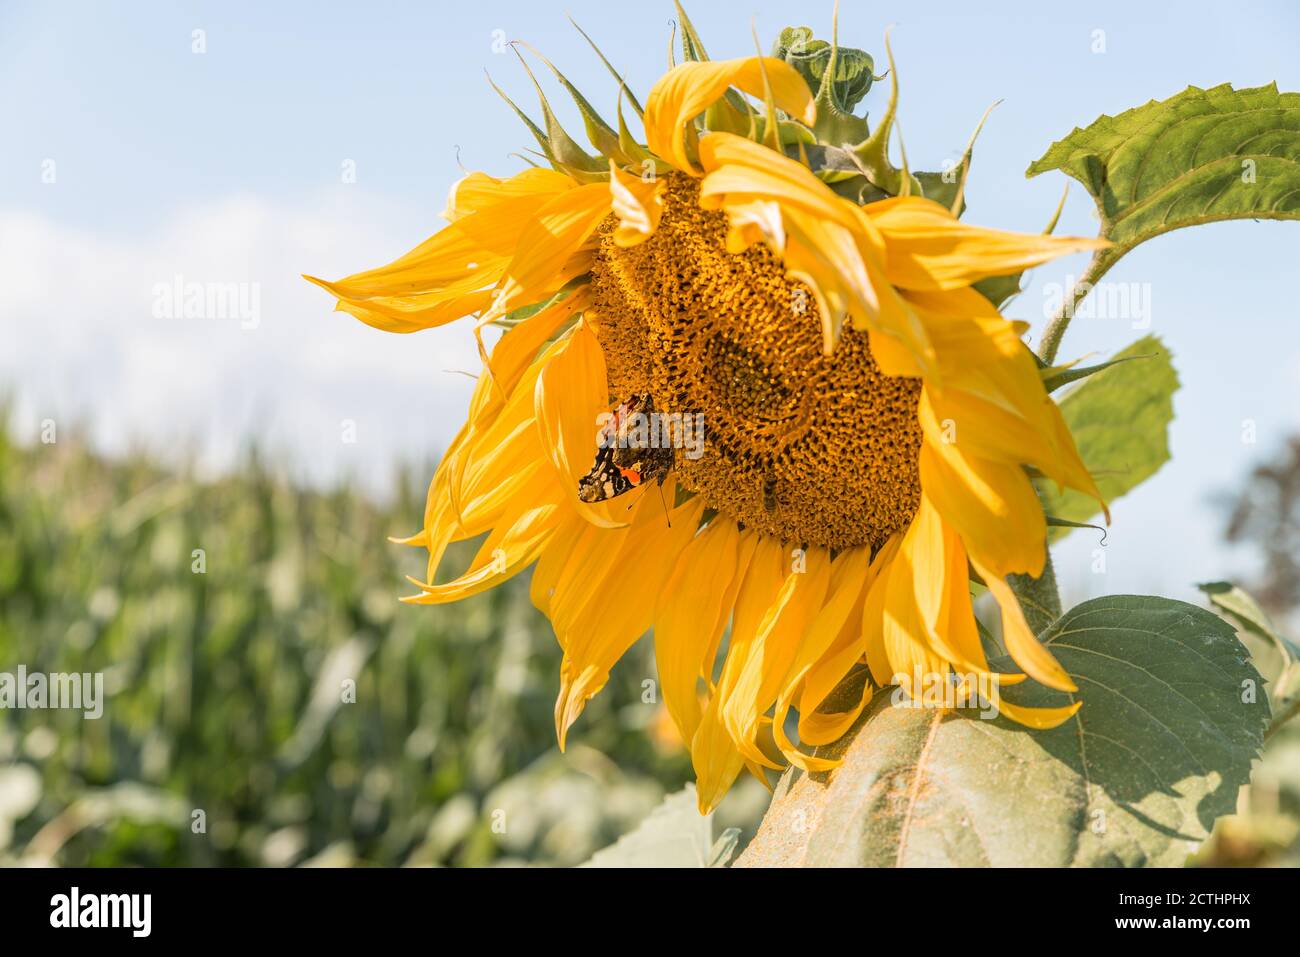 Close-up of a ripe sunflower in late summer with an admiral butterfly collecting nectar and pollen, Germany Stock Photo